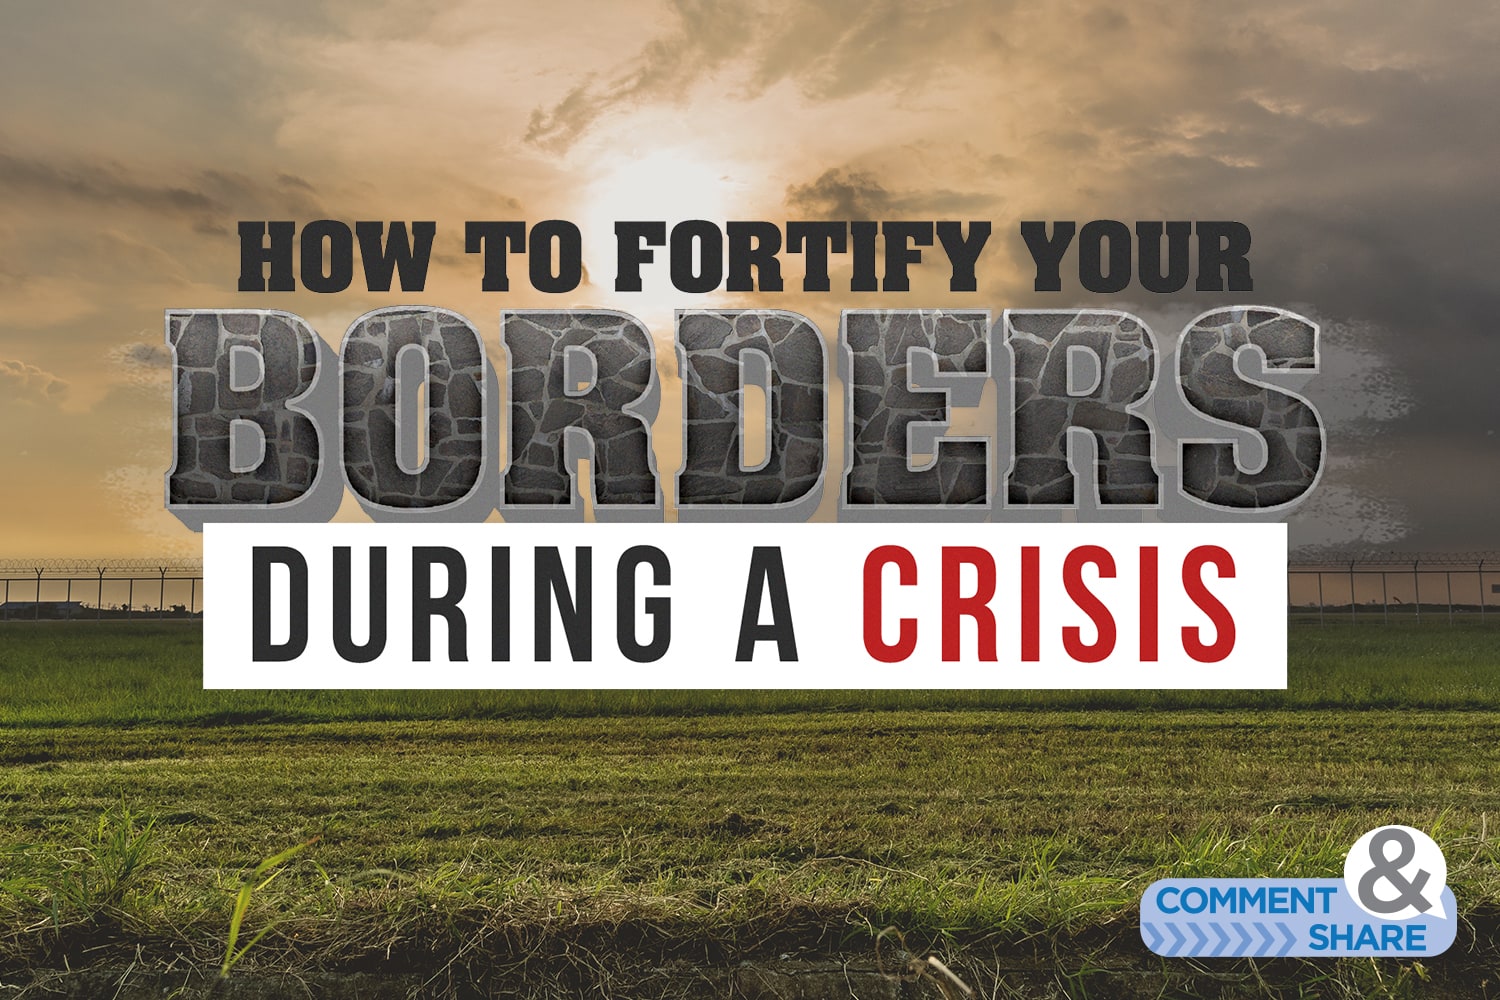 How to Fortify Your Borders in a Crisis